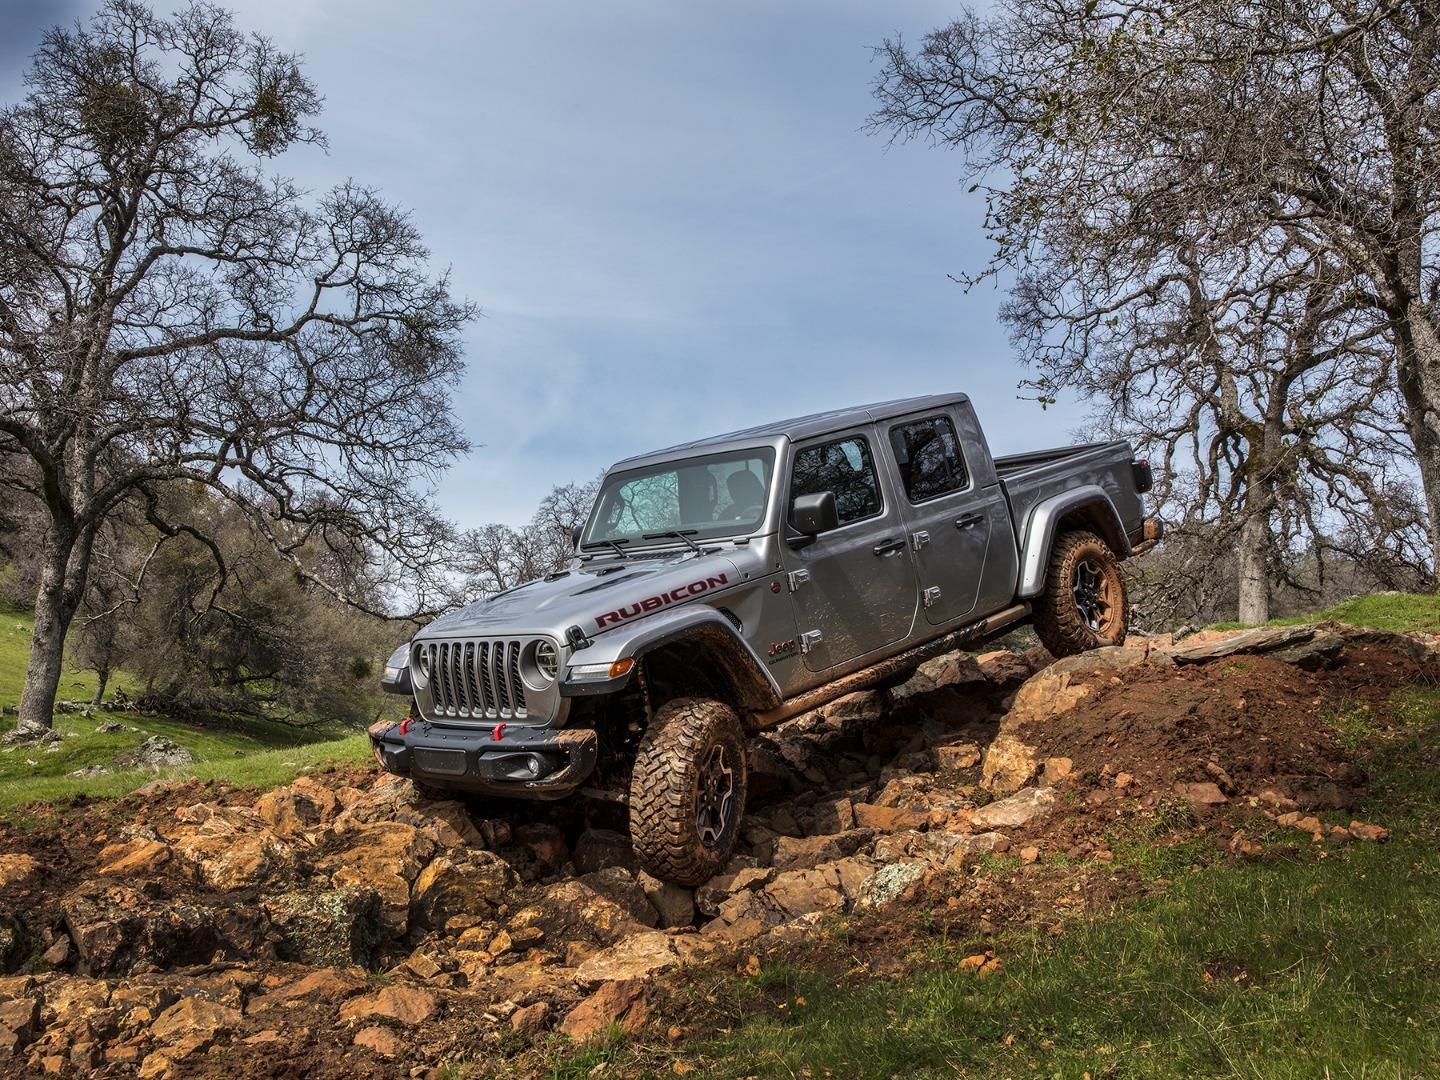 5 jeep wrangler accessories you didn’t know you needed.